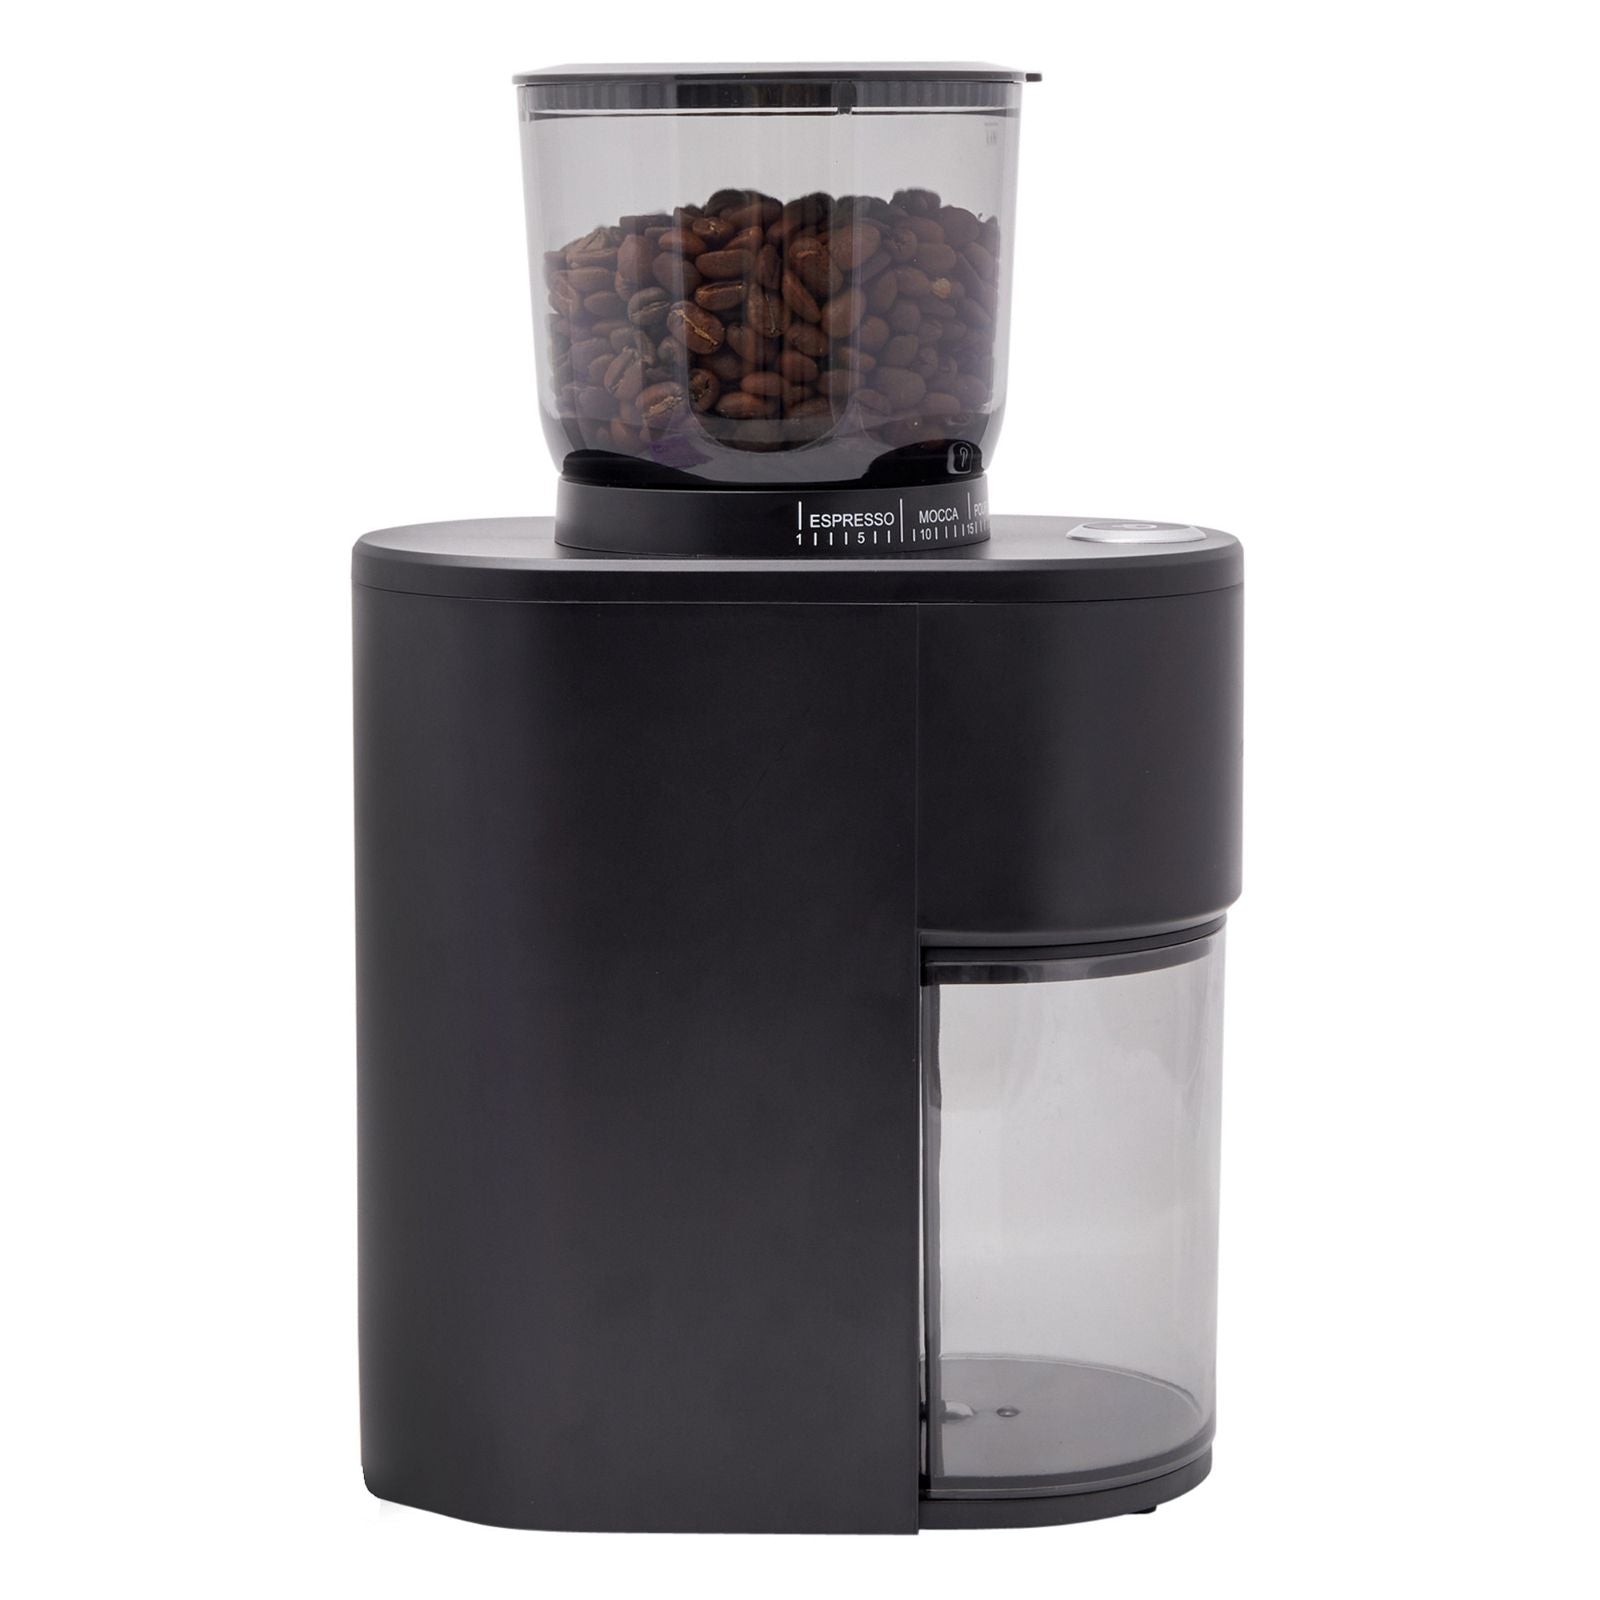 Westinghouse Conical Burr Grinder 160g Black-#product_category#- Distributed by:  under license